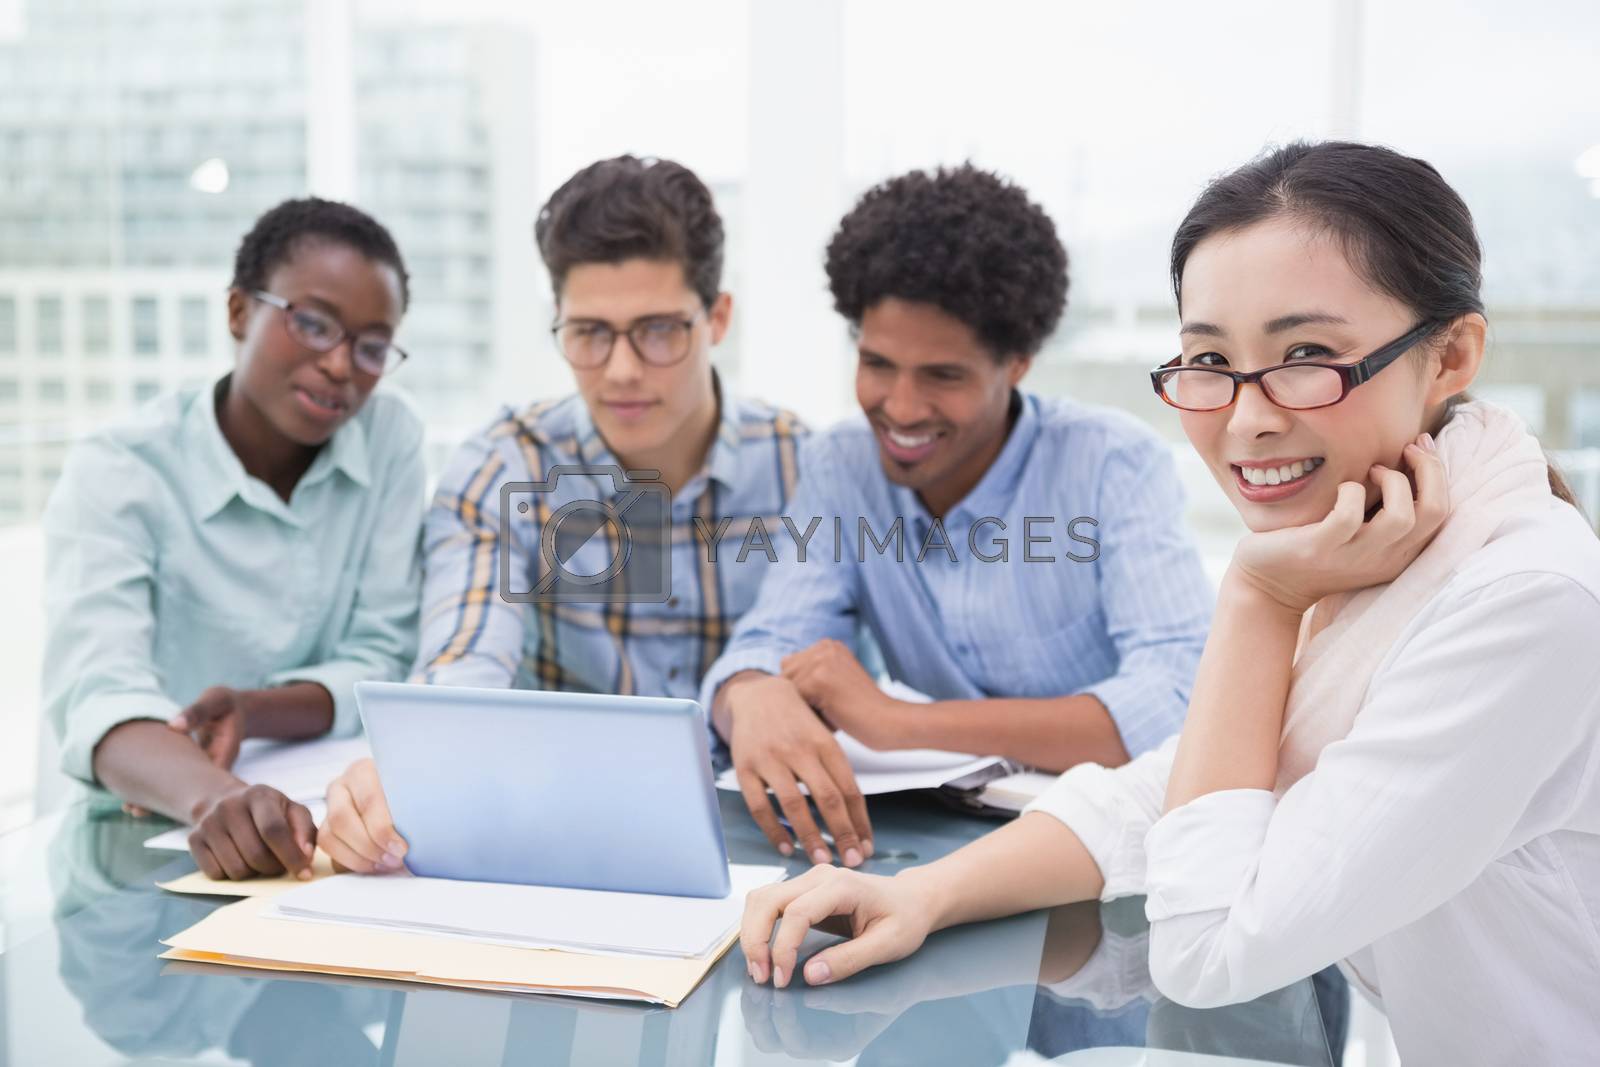 Royalty free image of Casual business team having a meeting by Wavebreakmedia